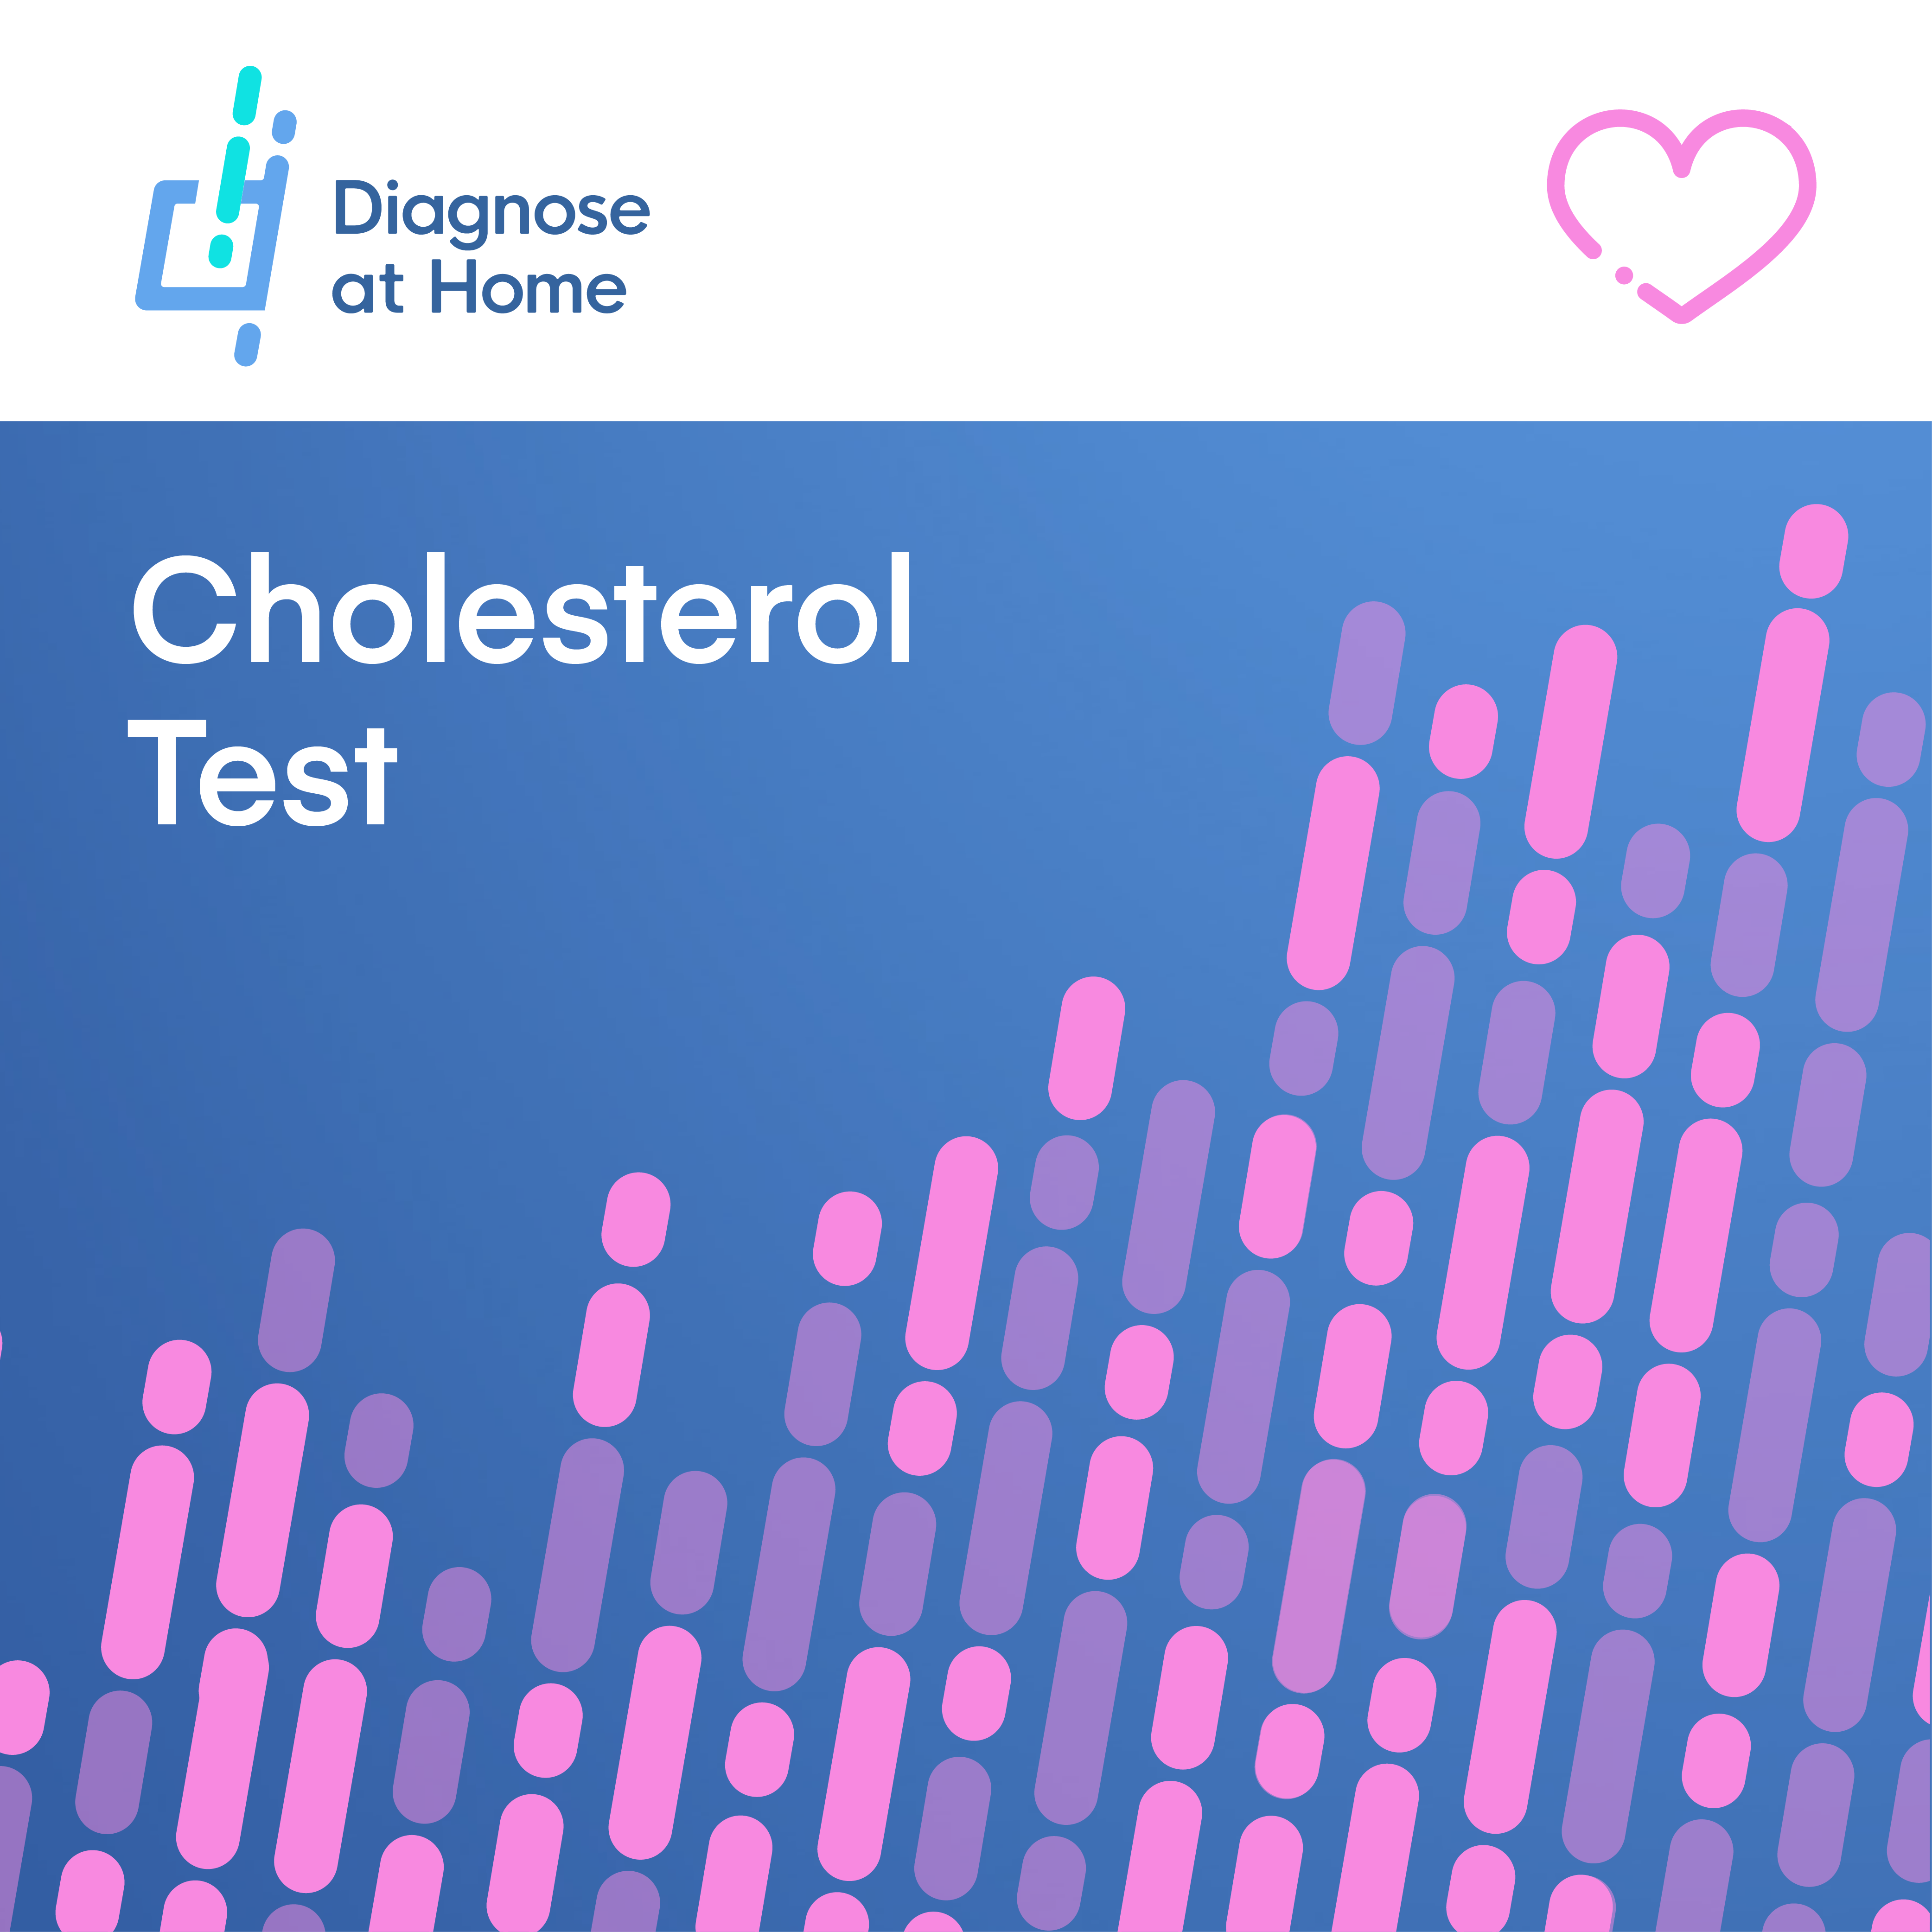 Cholesterol Test cover image